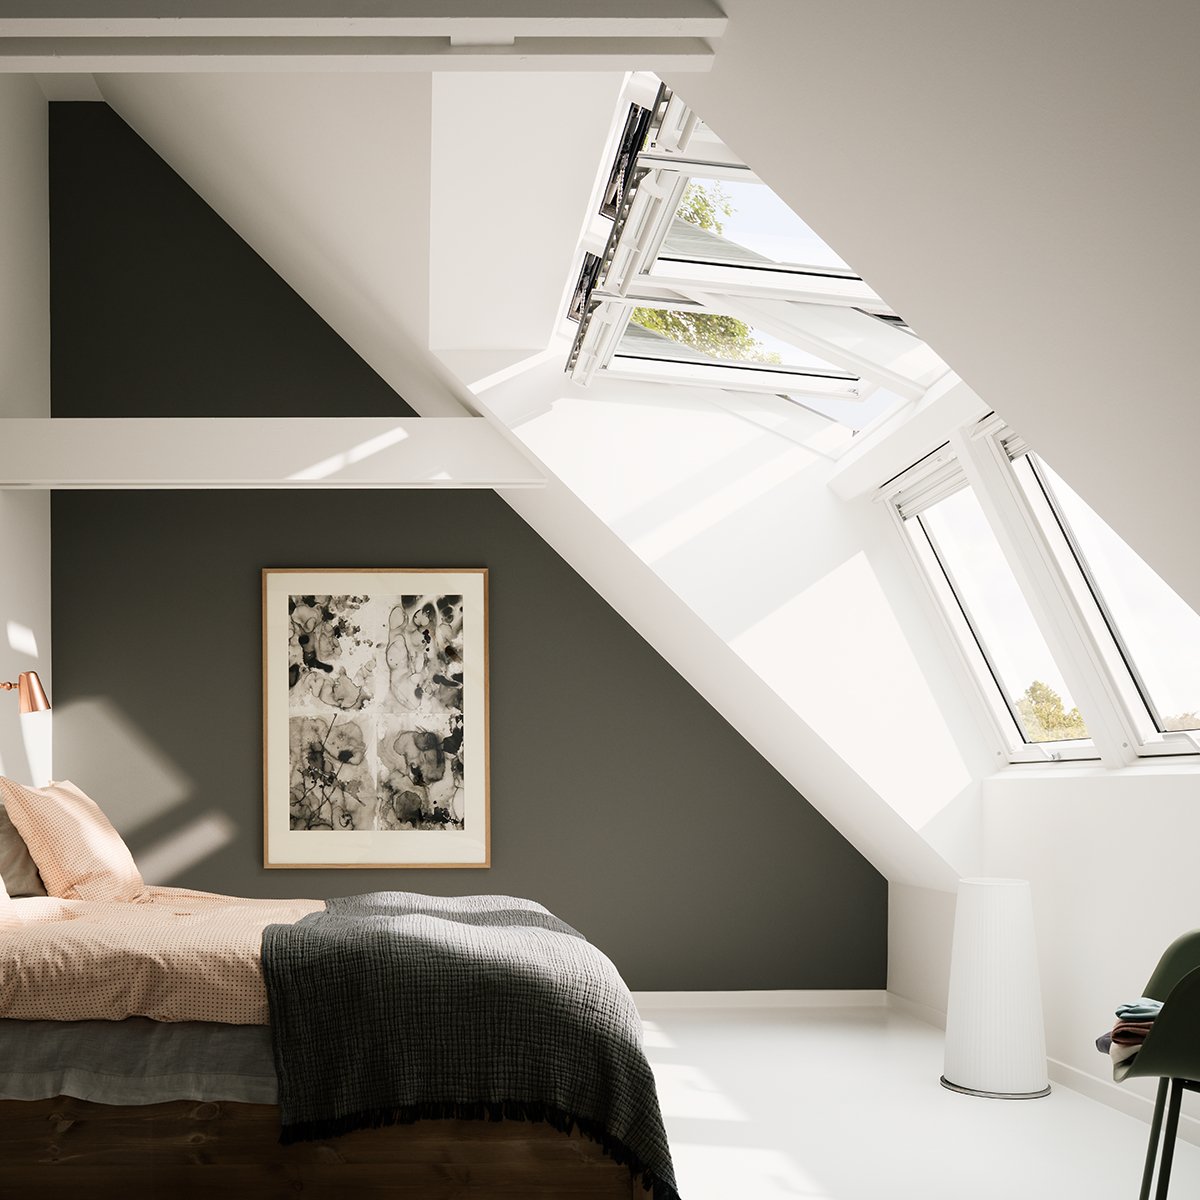 An image of velux dormer window interior 005  goes here.